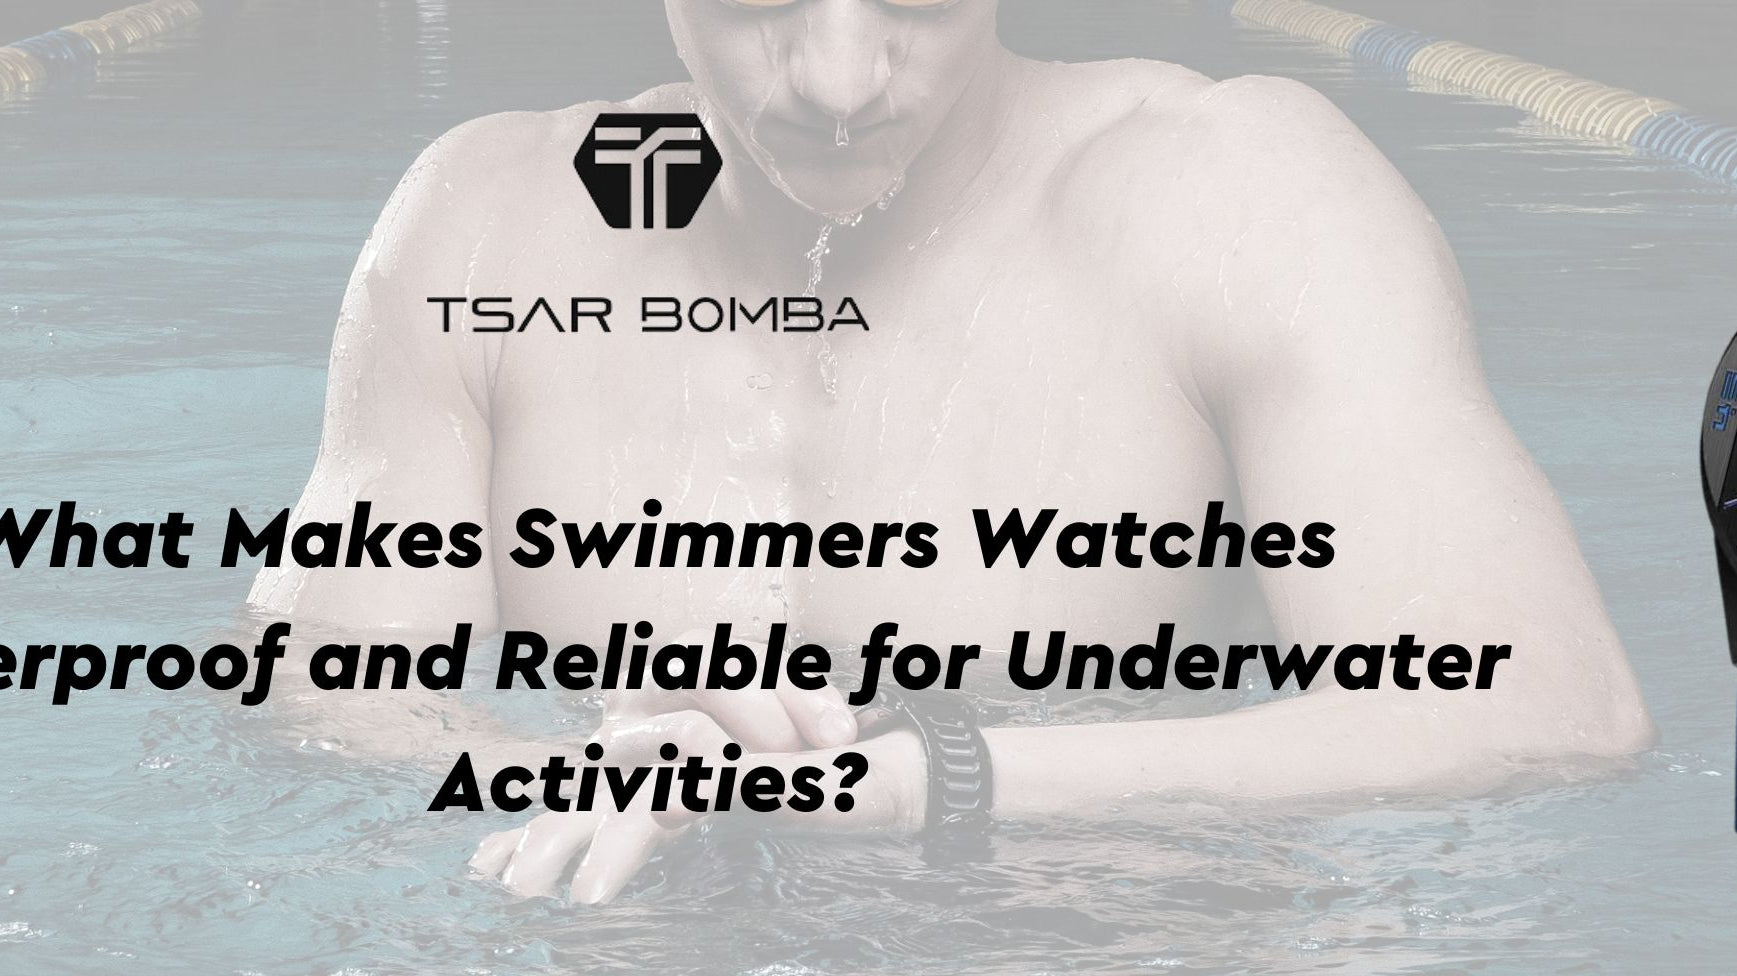 What Makes Swimmers Watches Waterproof and Reliable for Underwater Activities?